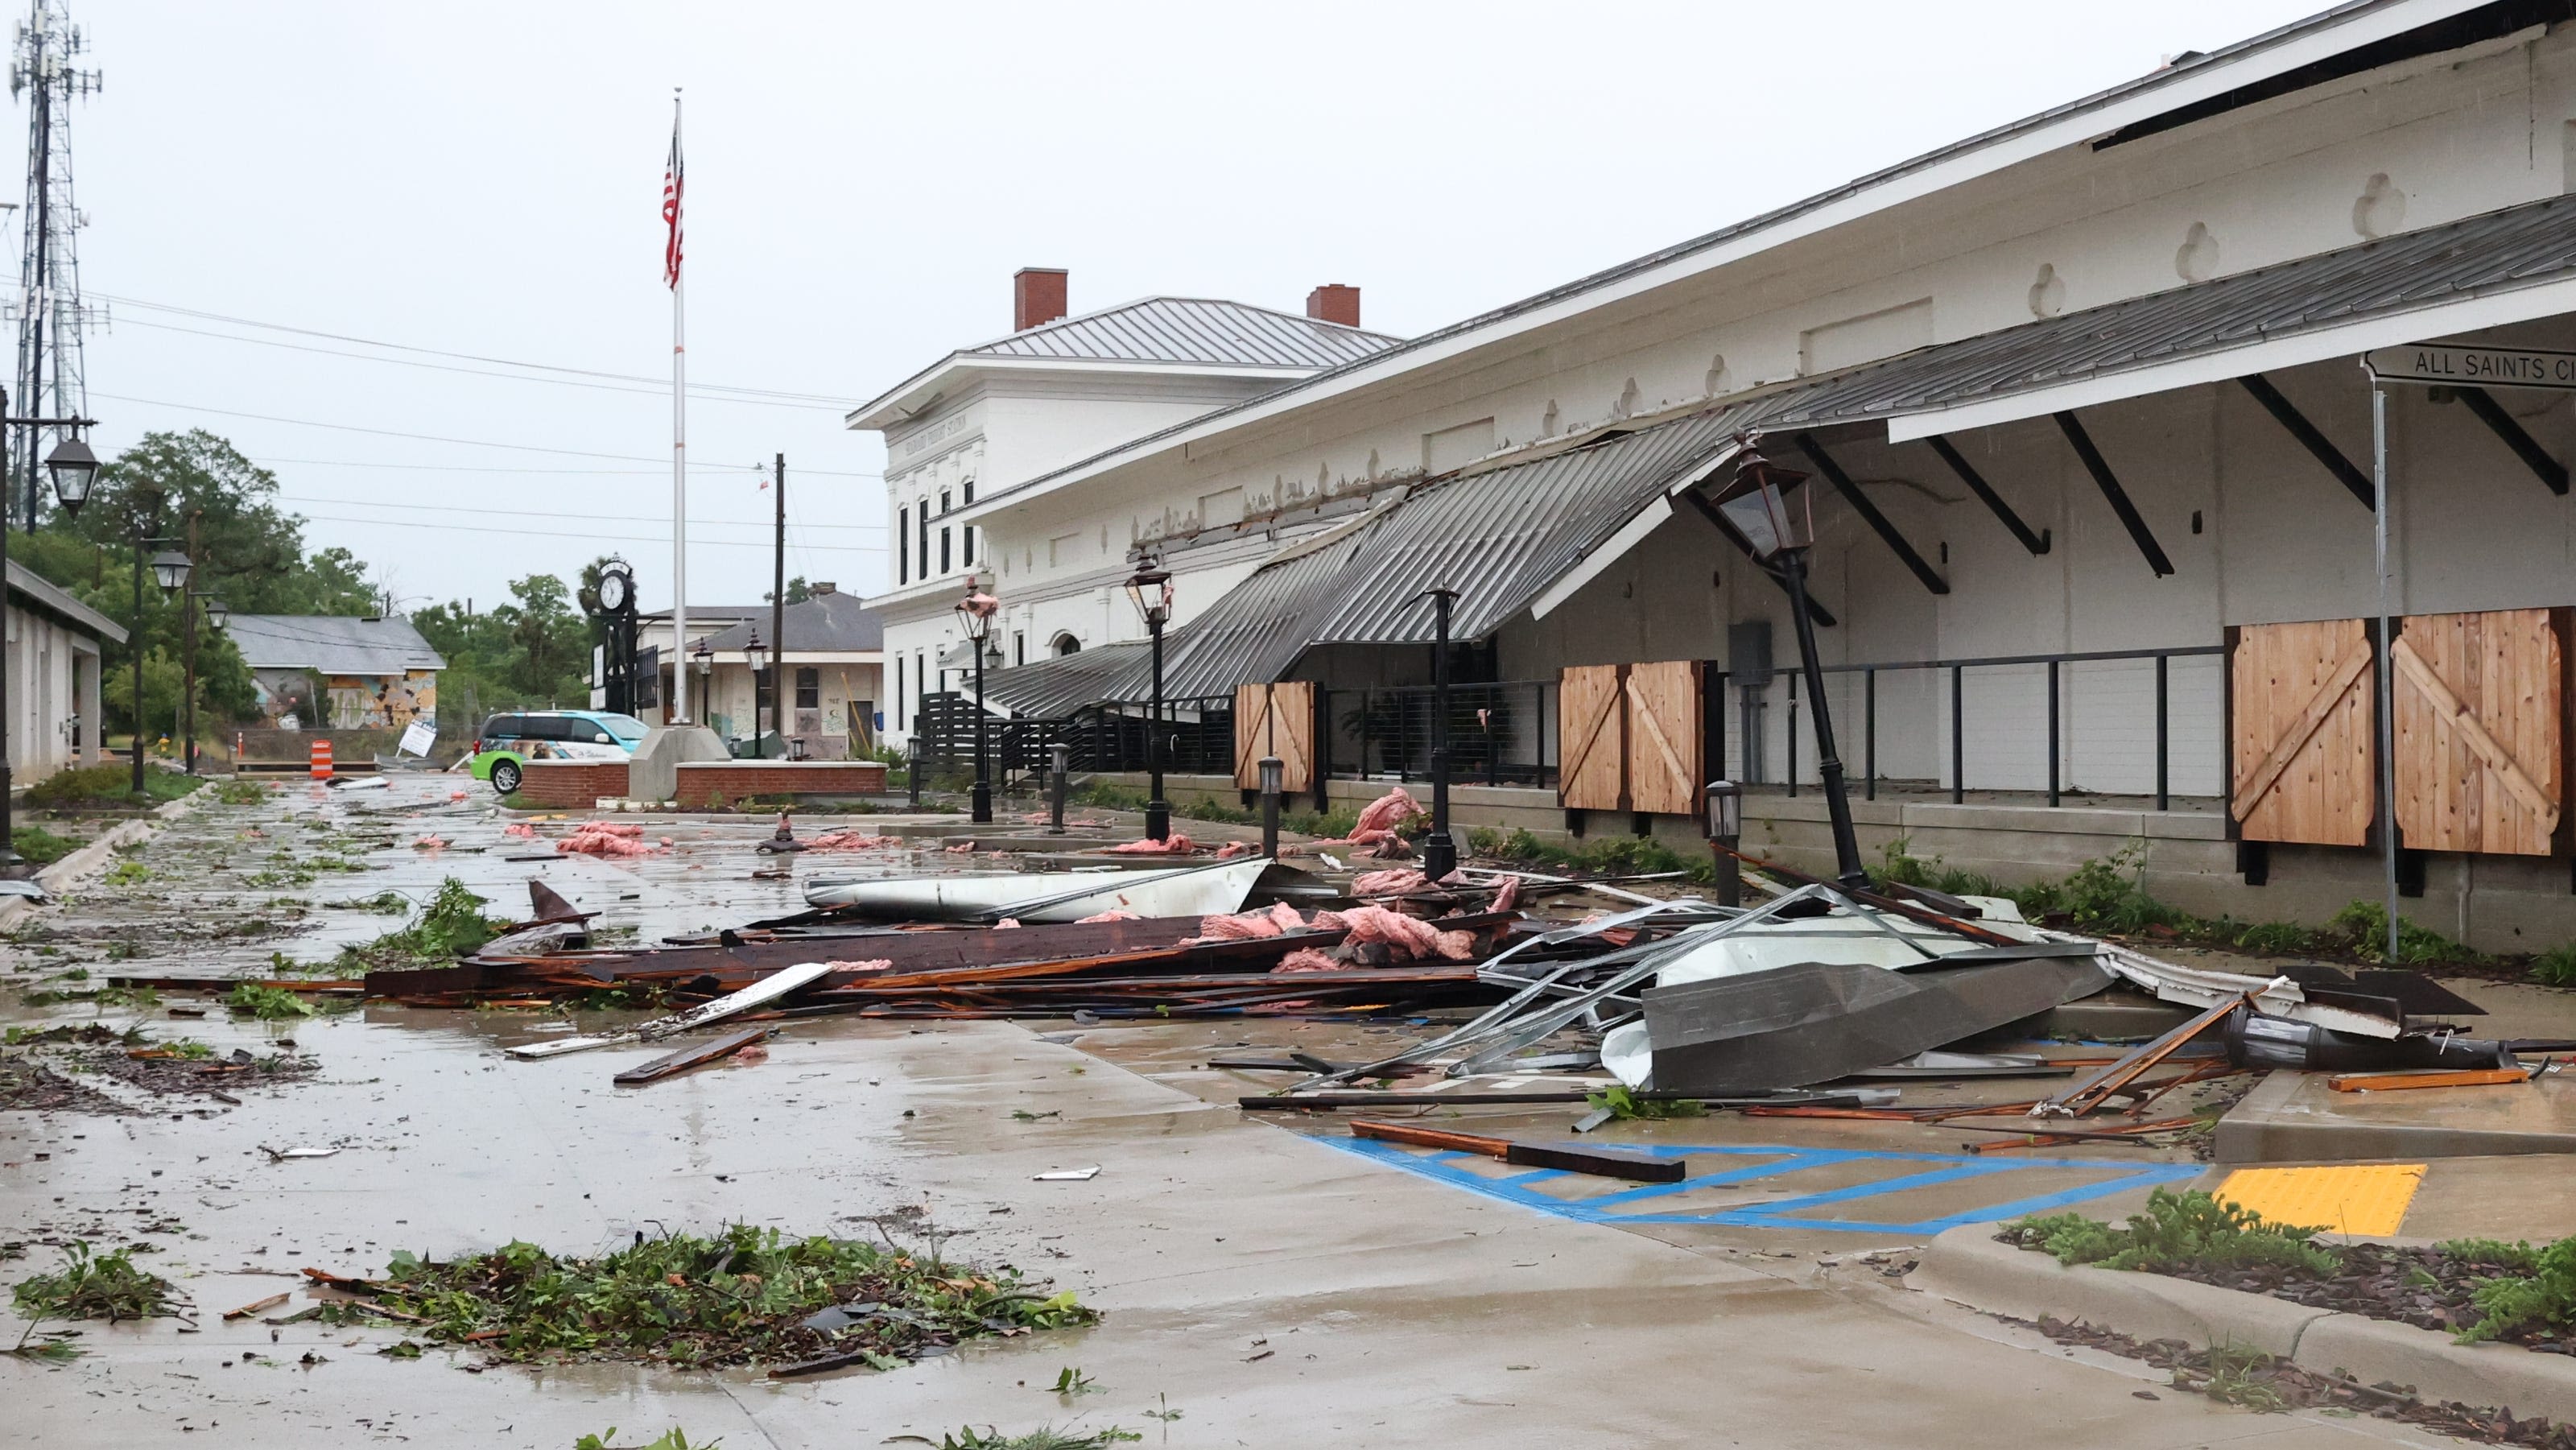 Tallahassee tornado live updates: Woman killed, 80,000 without power amid widespread damage